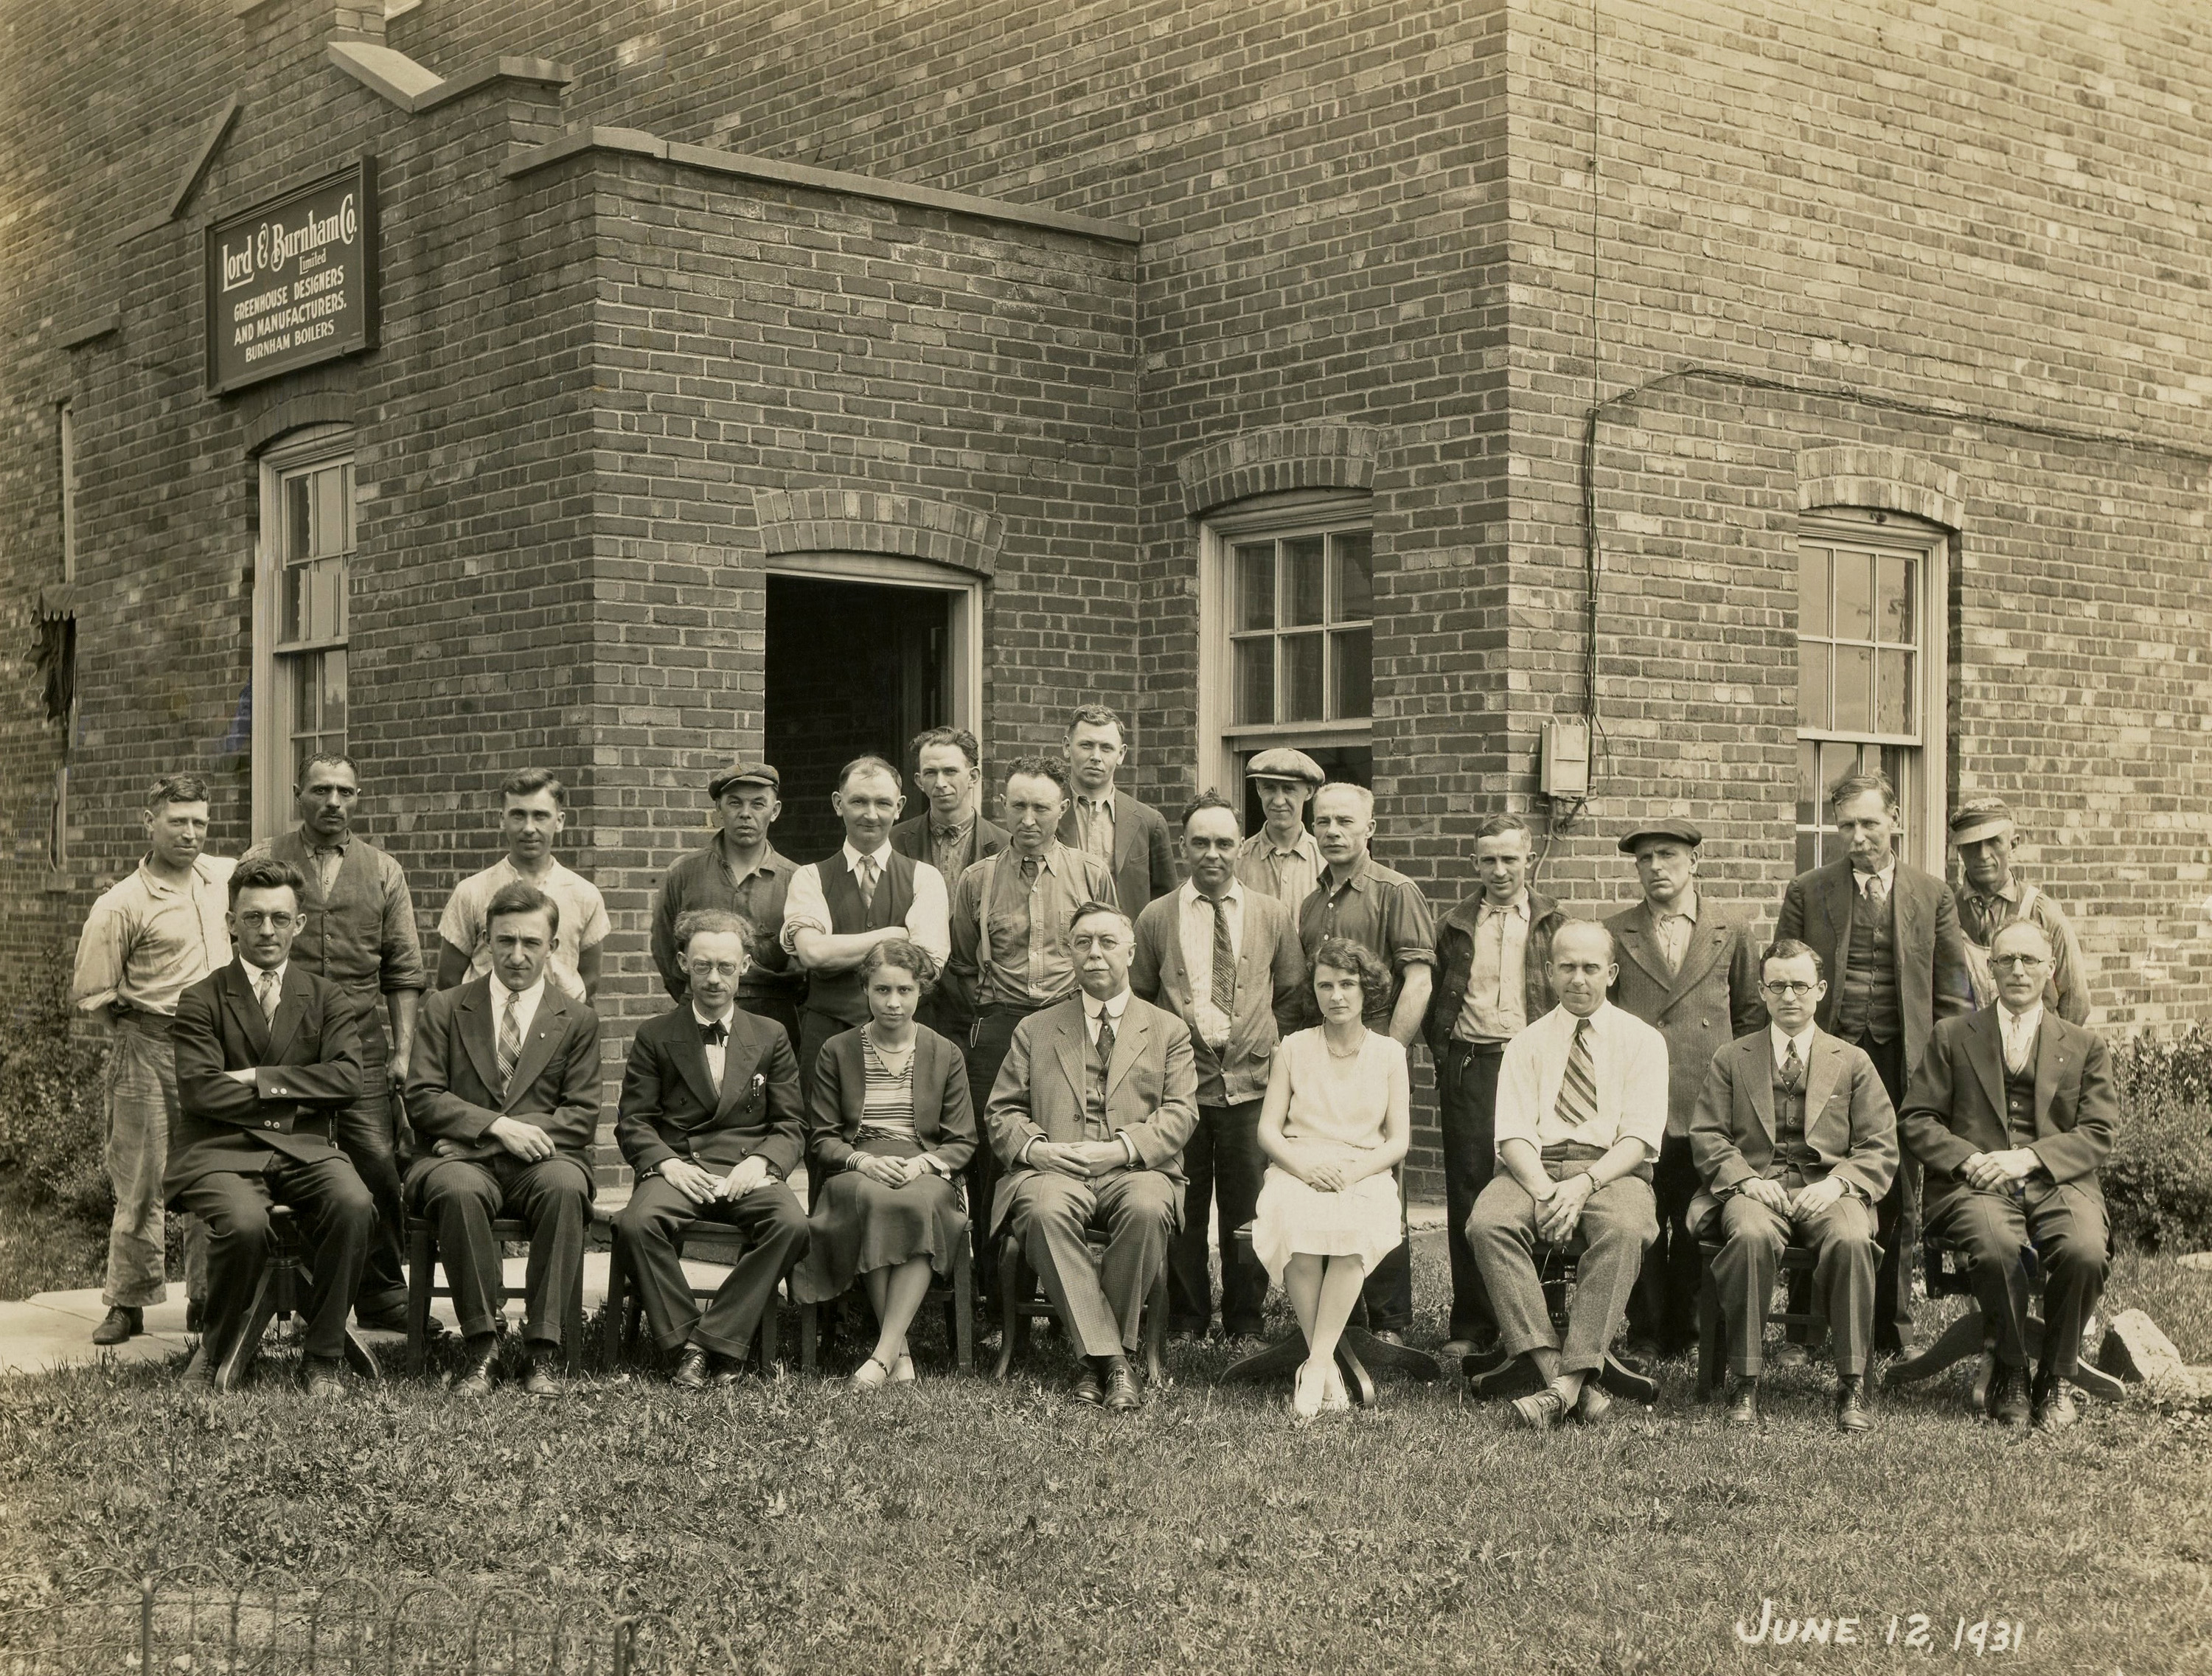 Employees of Lord & Burnham Company, greenhouse designers and manufacturers, St. Catharines, Ontario, Canada. This photo was taken outside the factory on Welland Avenue on June 12, 1931. The distinguished gentleman ensconced between the two ladies is my great-grandfather, Edmund I. Lorenzen. View full size.